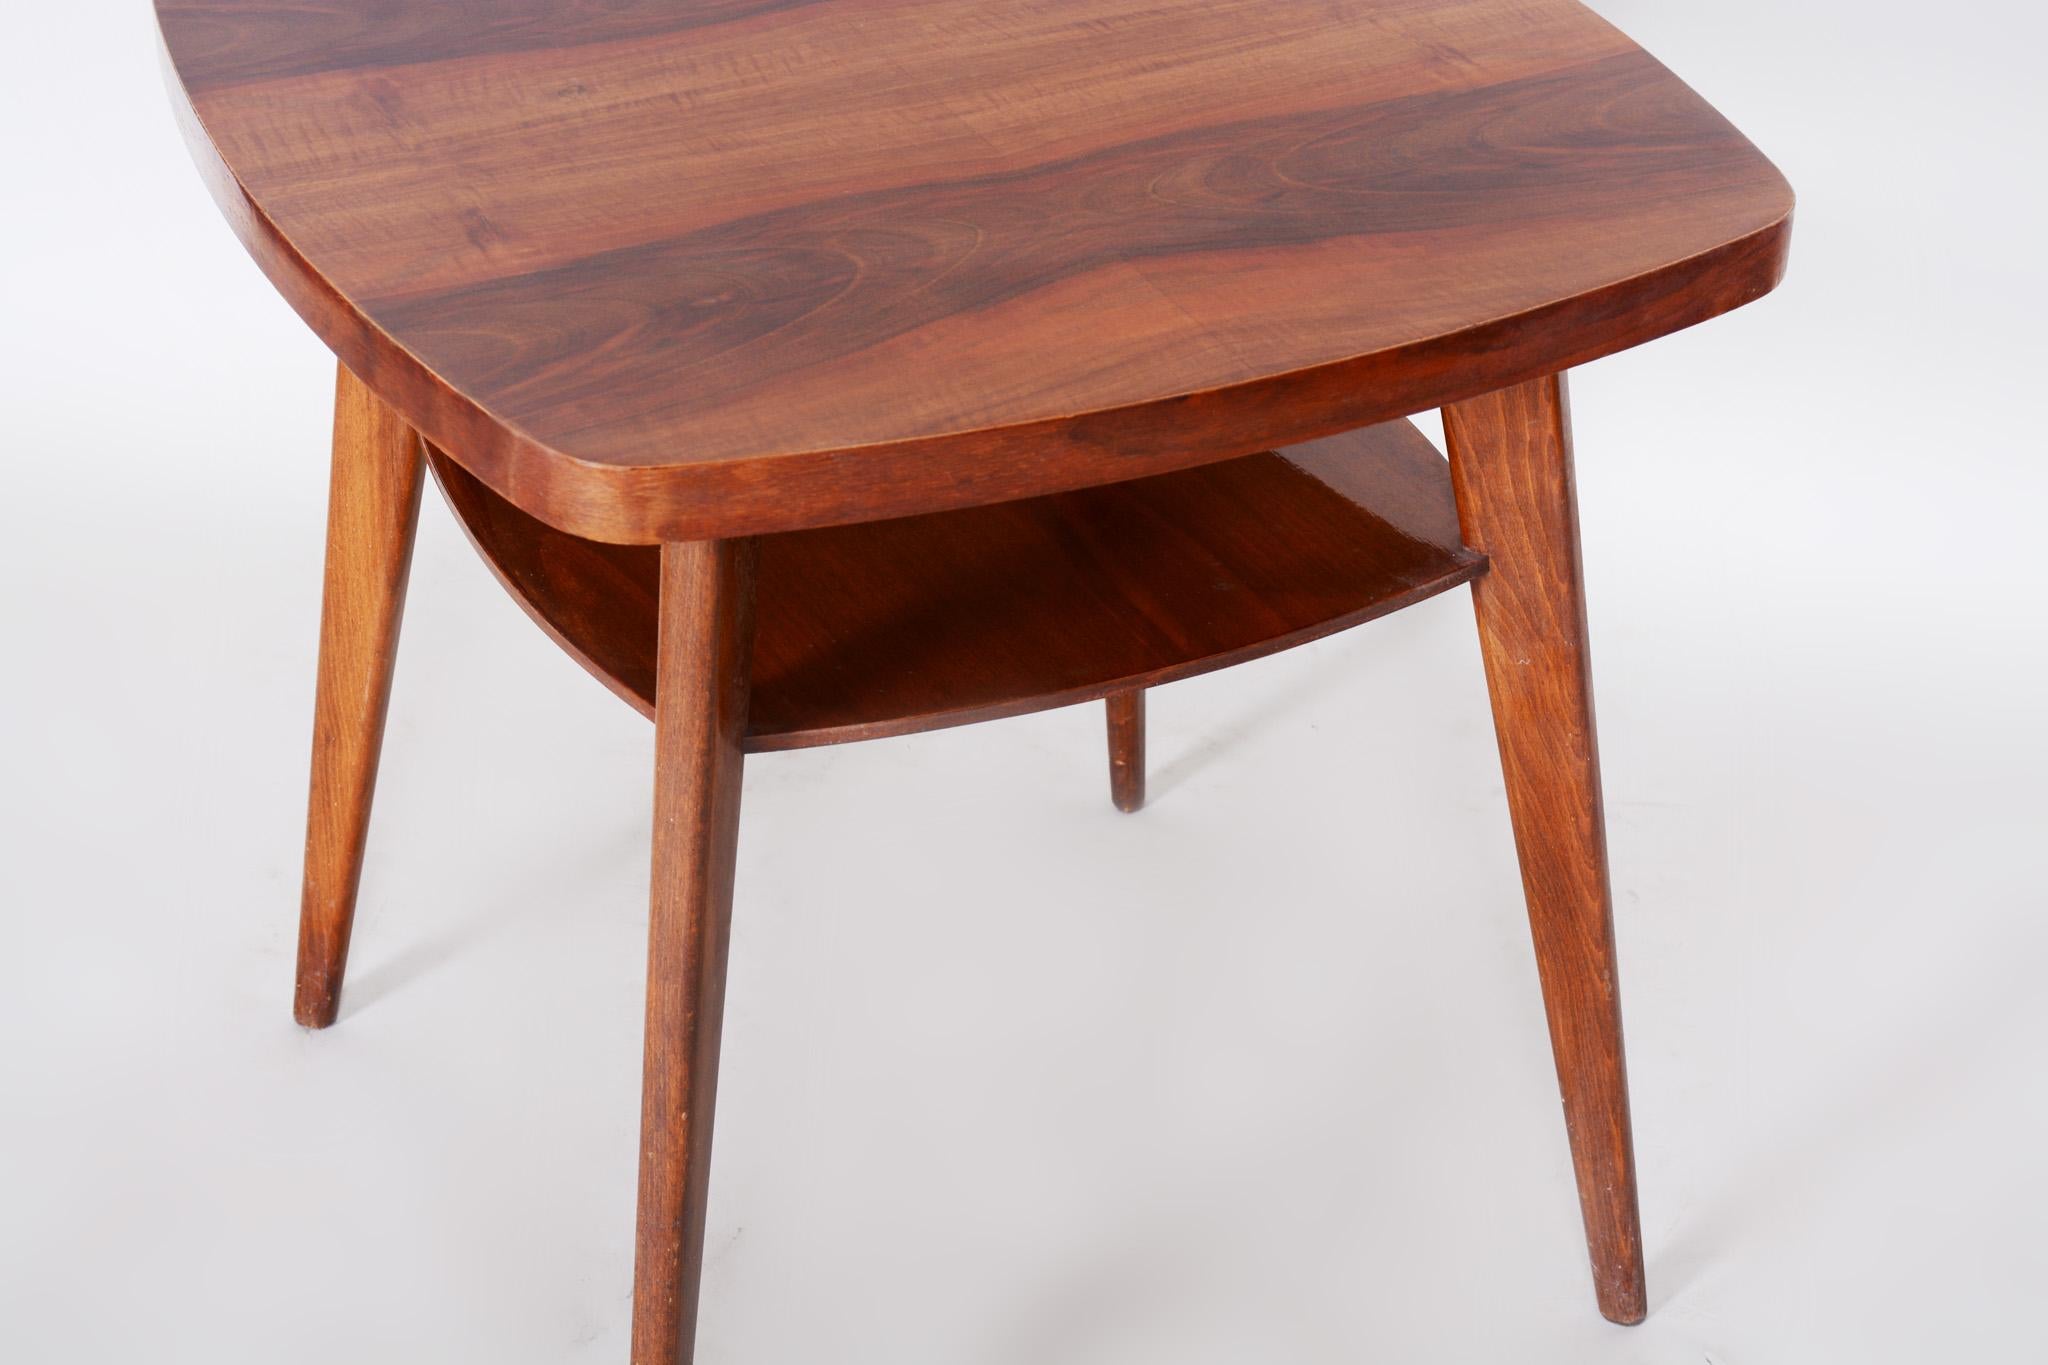 Walnut Table, Czech Midcentury, Preserved Original Condition, 1950s For Sale 1